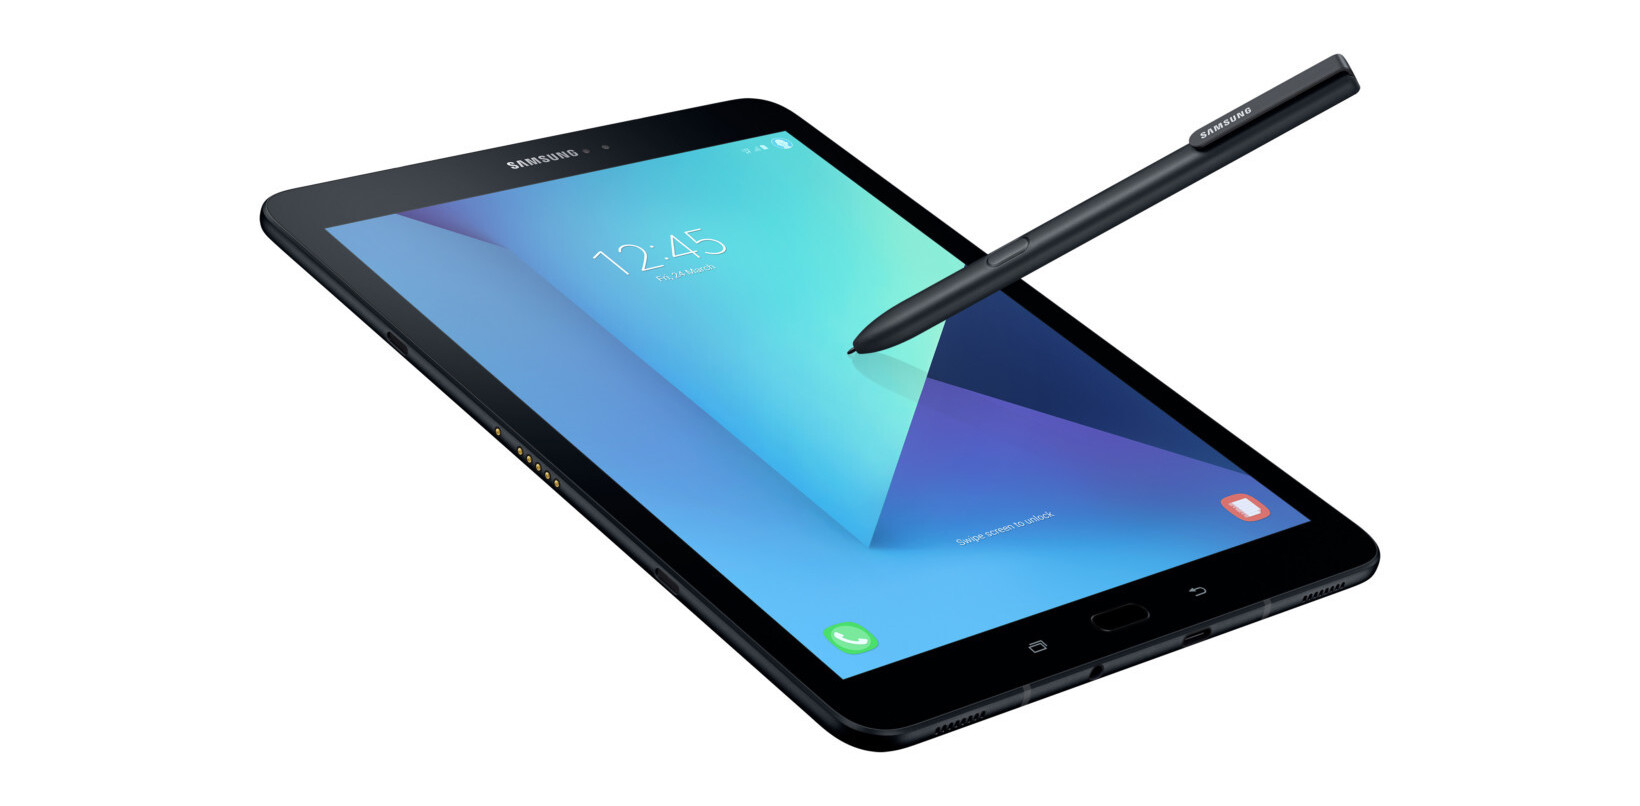 Samsung’s new Galaxy Tab S3 packs a huge battery and an improved stylus